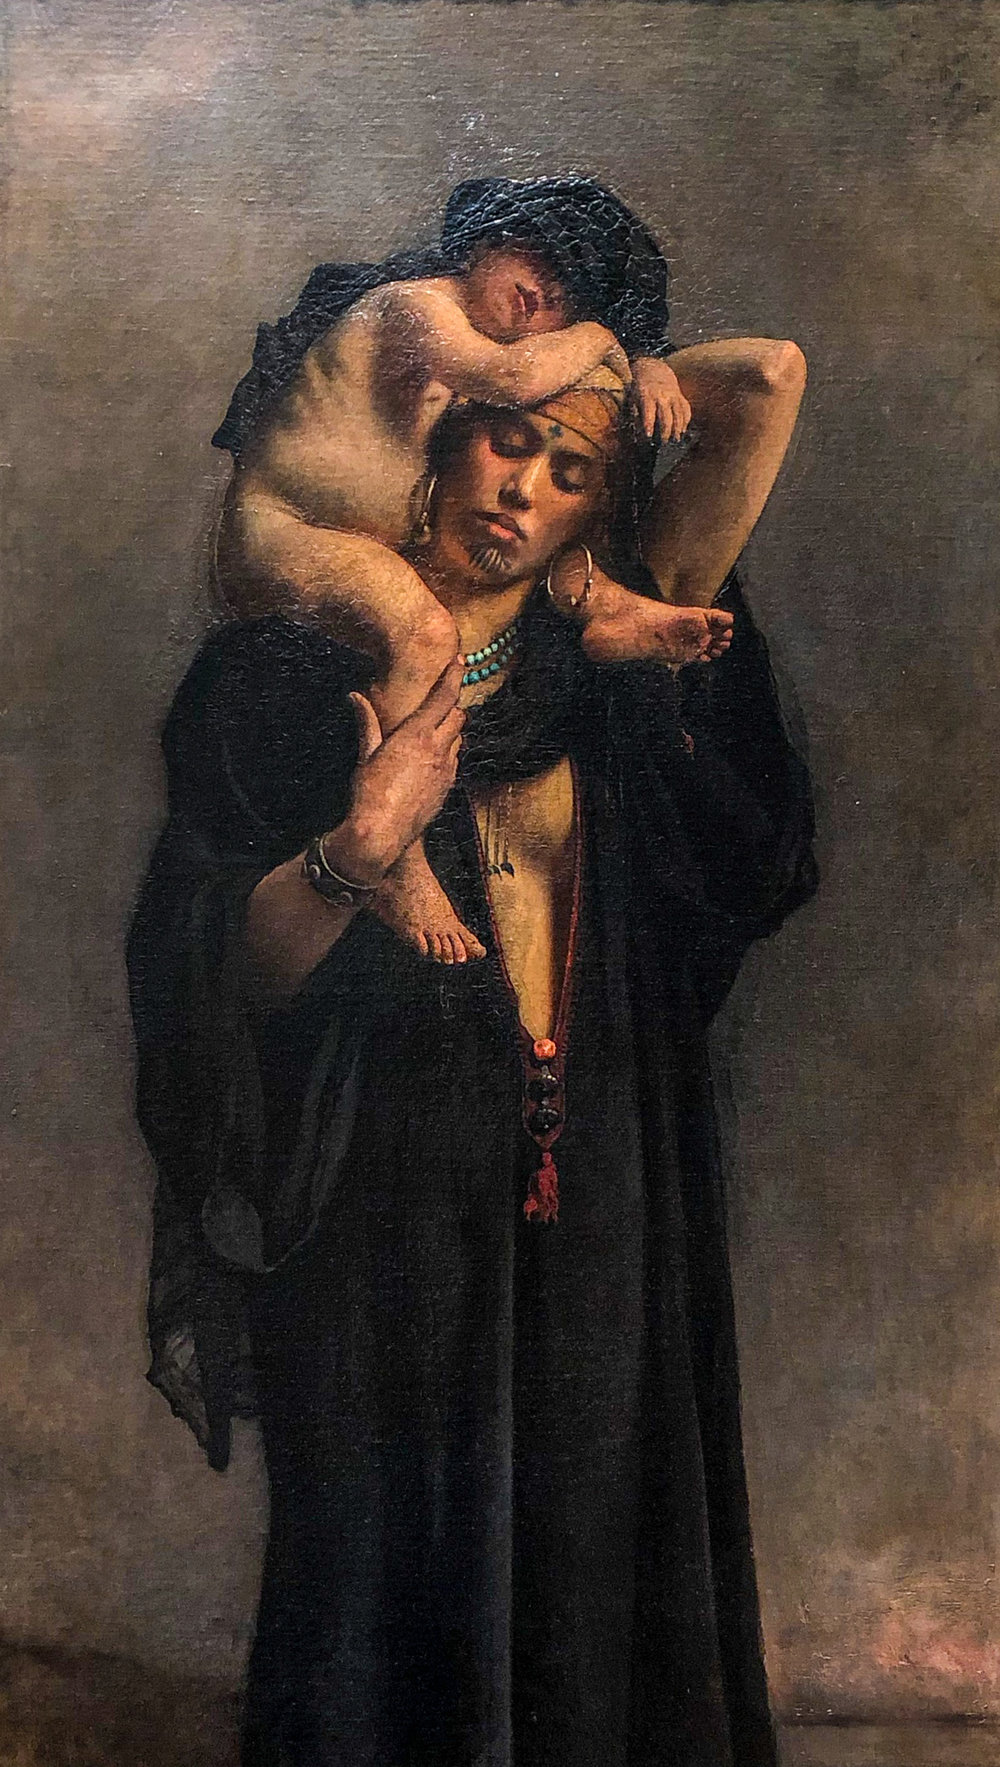 @ Egyptian Peasent Woman and Her Child_Leon Bonnet (1869-70) copy 2.jpg